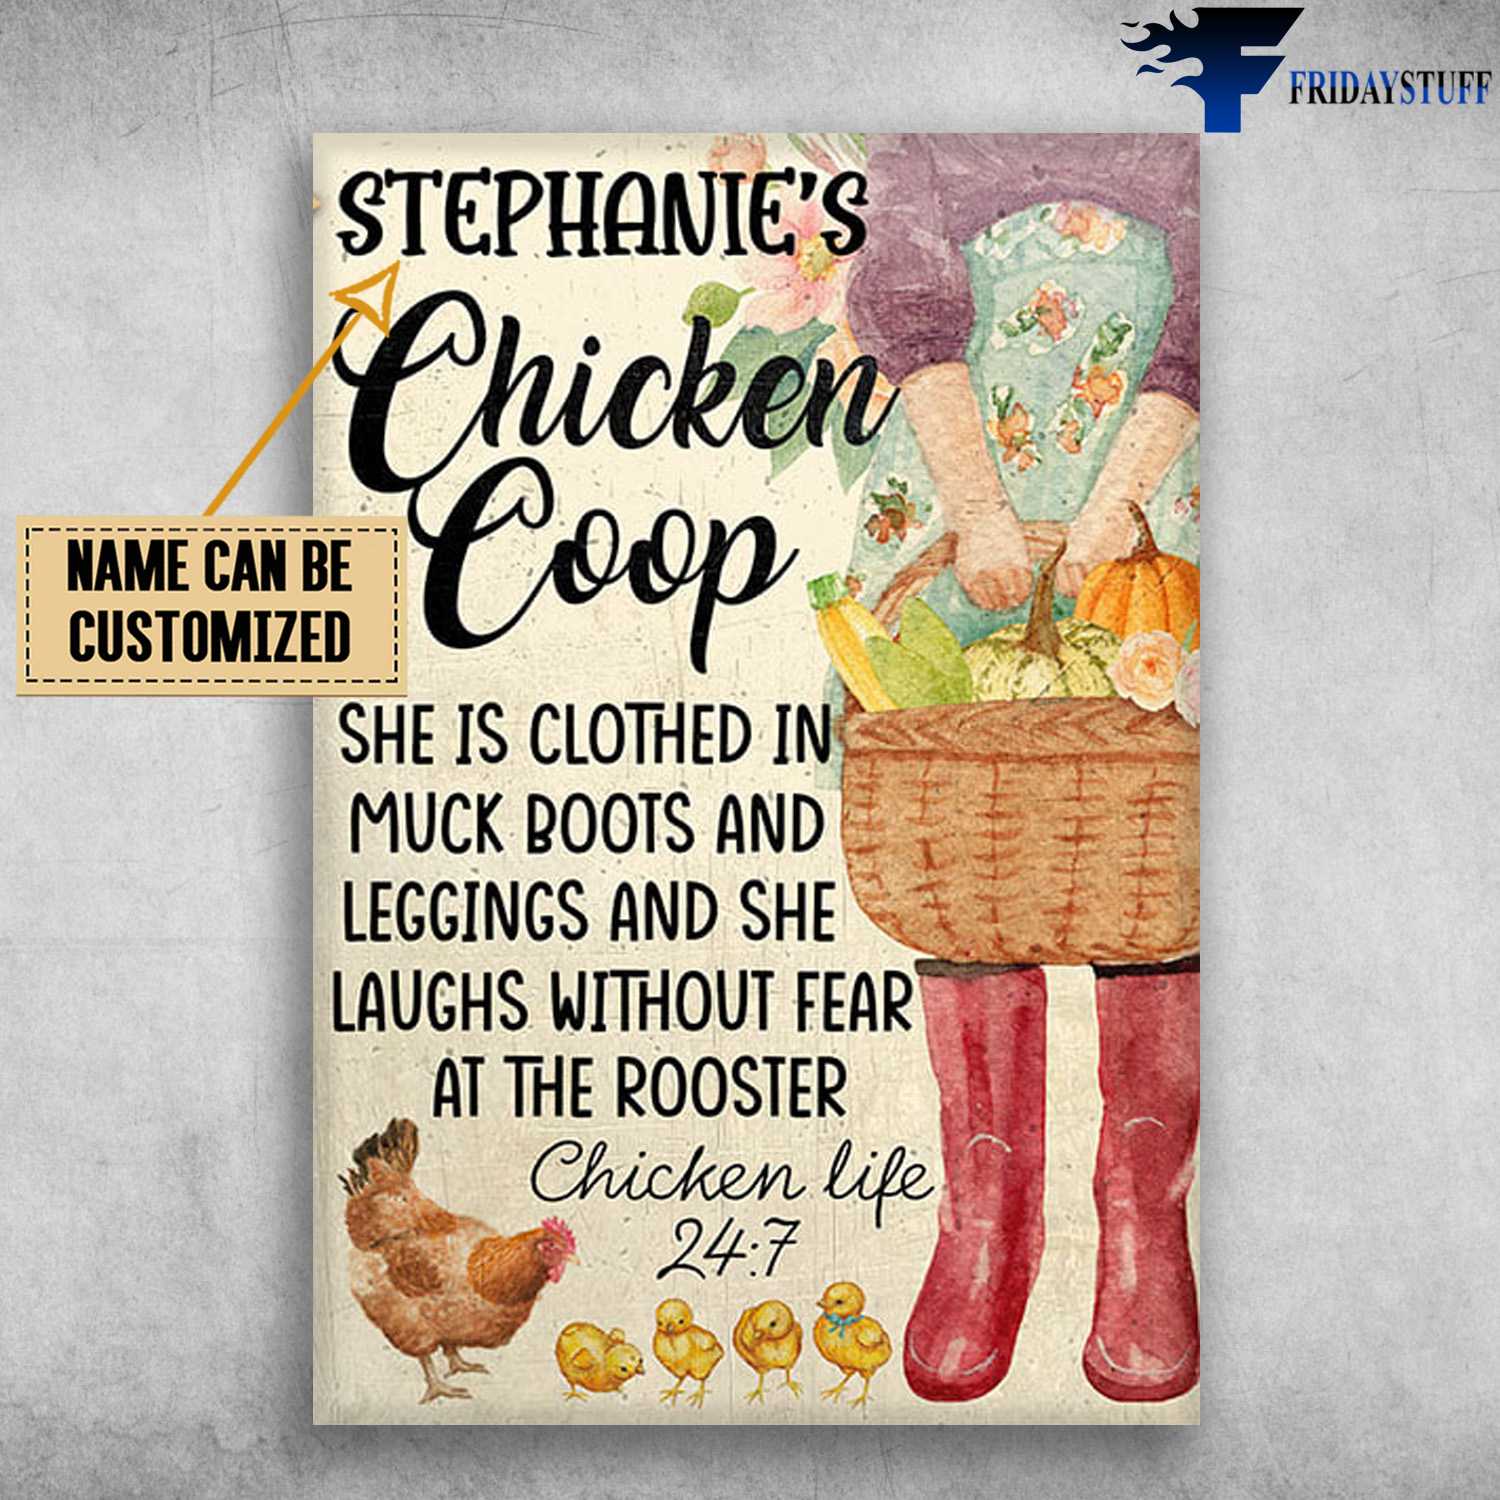 Chicken Family, Chicken Coop, She Is Clothed In Muck Boots And Leddings, And She Laughs Without Fear, At The Rooster, Chicken Life